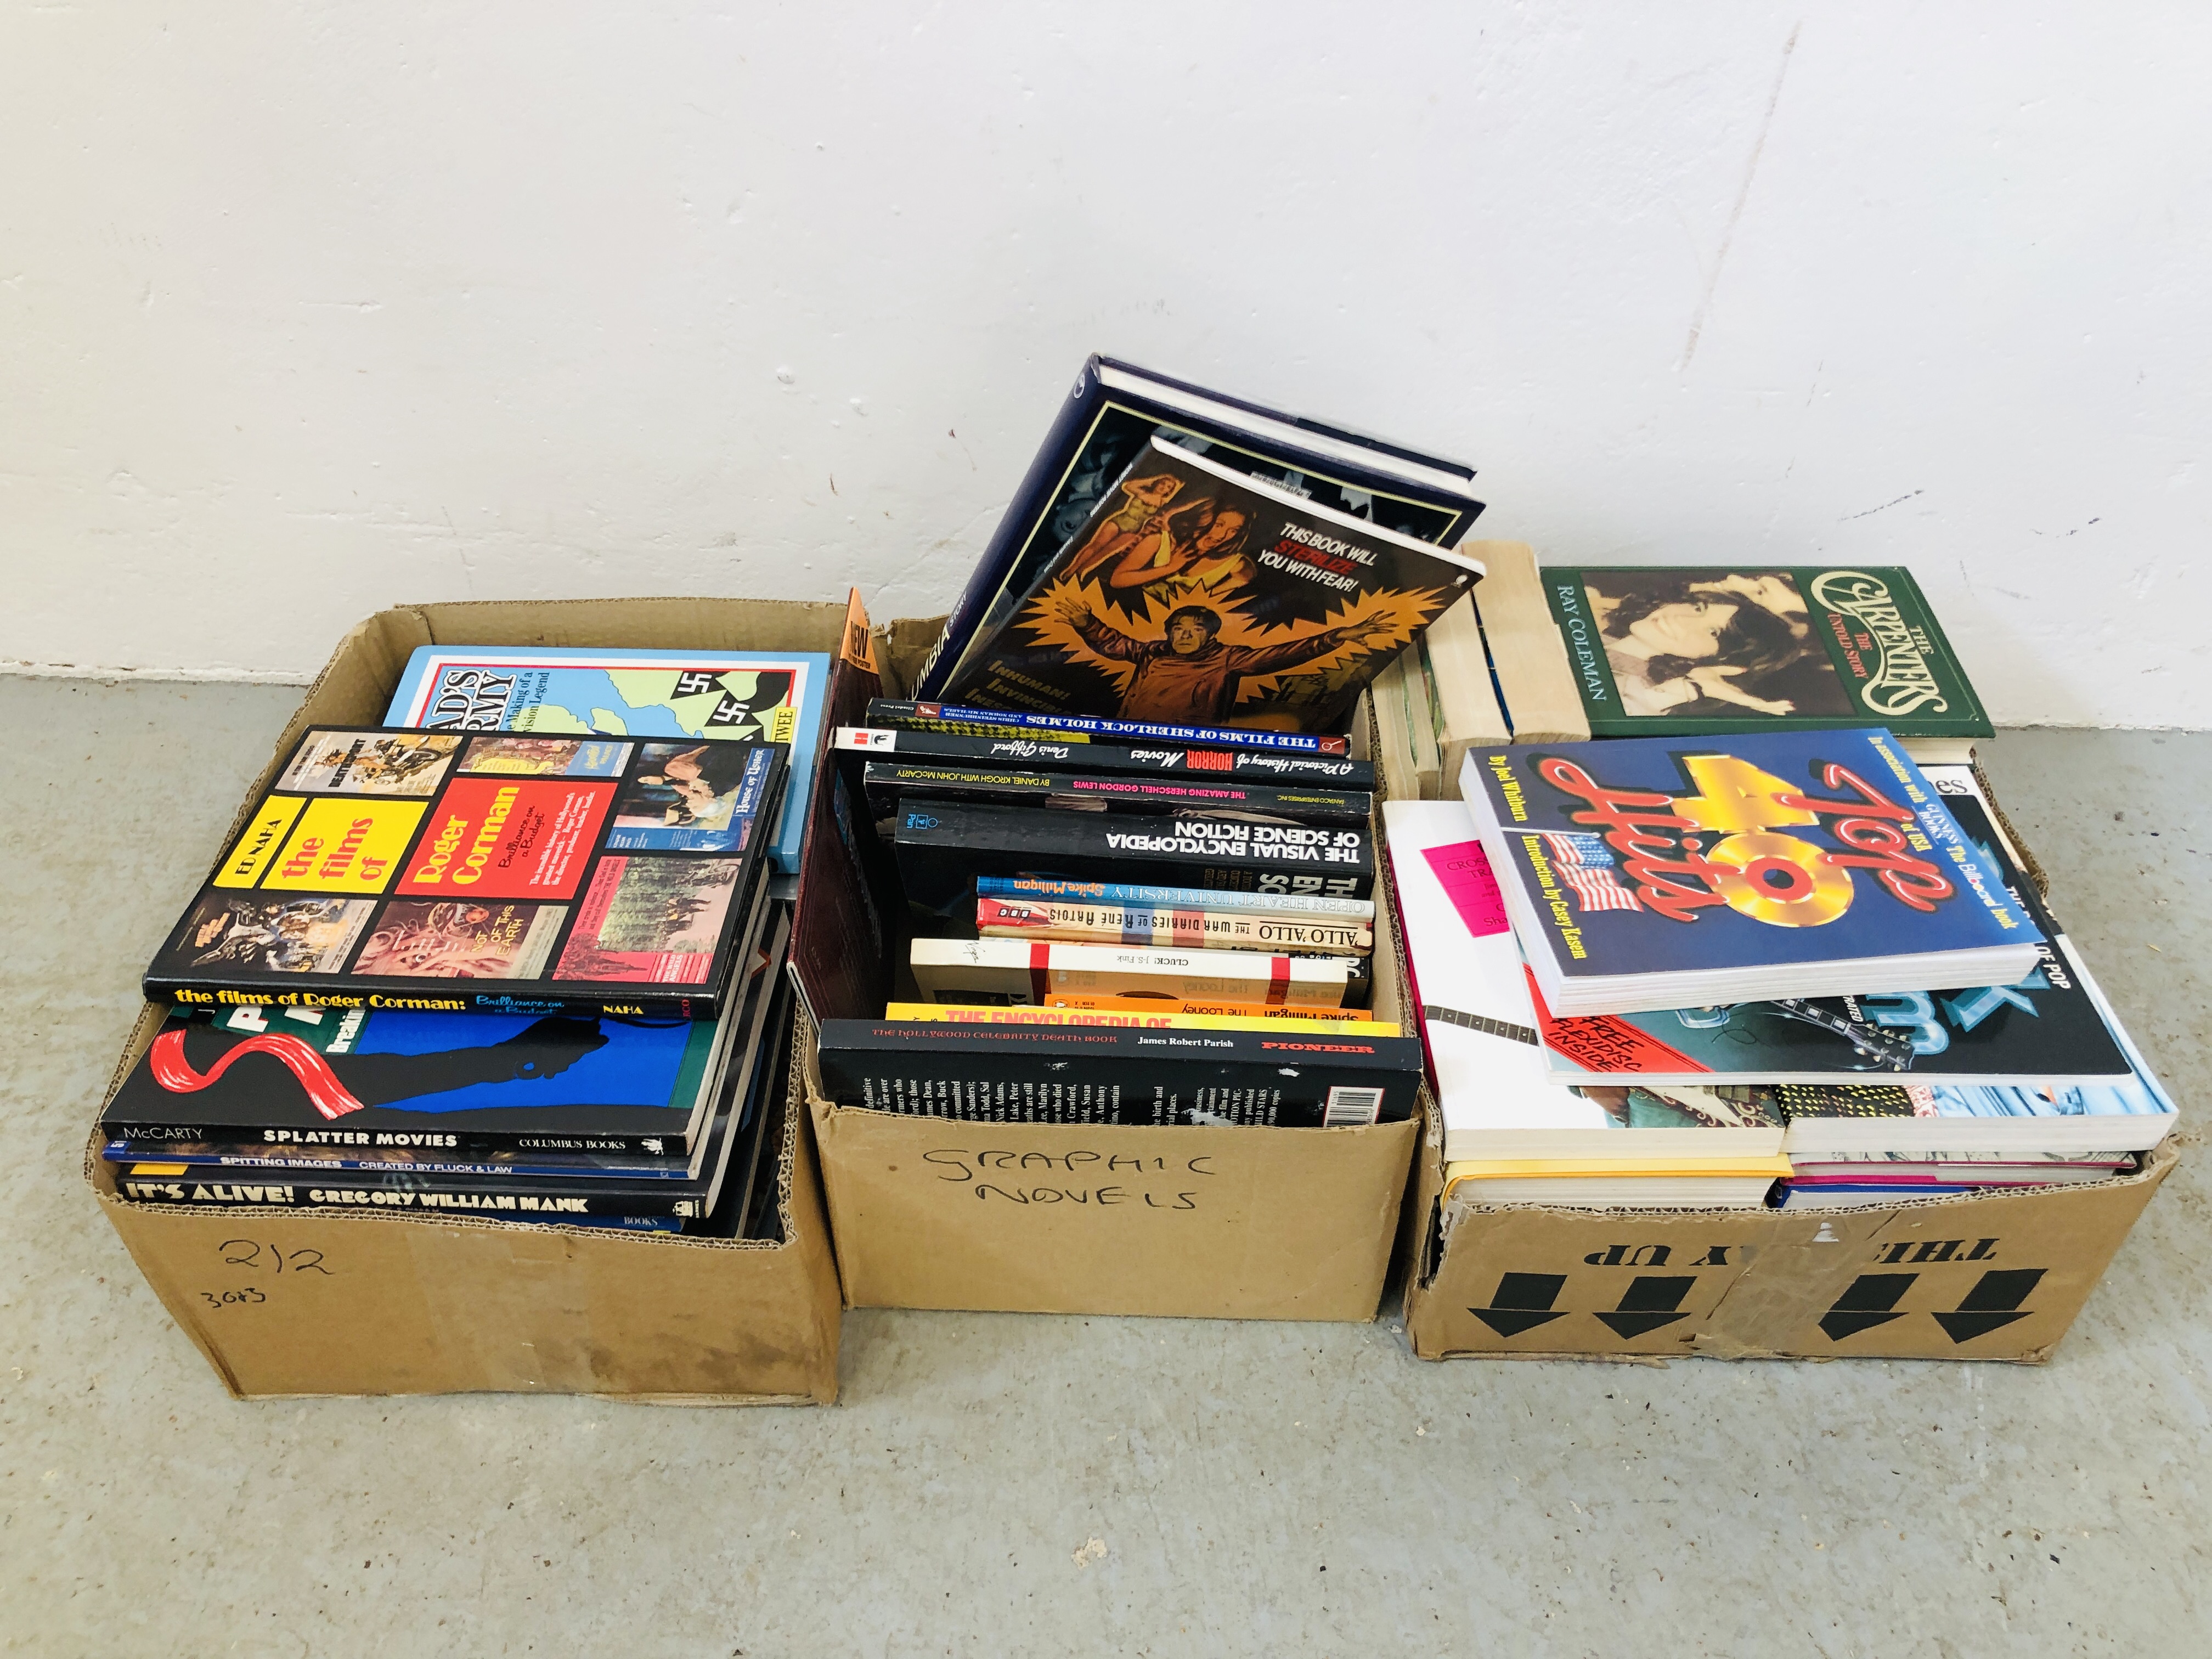 COLLECTION OF BOOKS TO INCLUDE MOVIE RELATED BOOKS AND A COLLECTION OF MUSIC RELATED BOOKS.